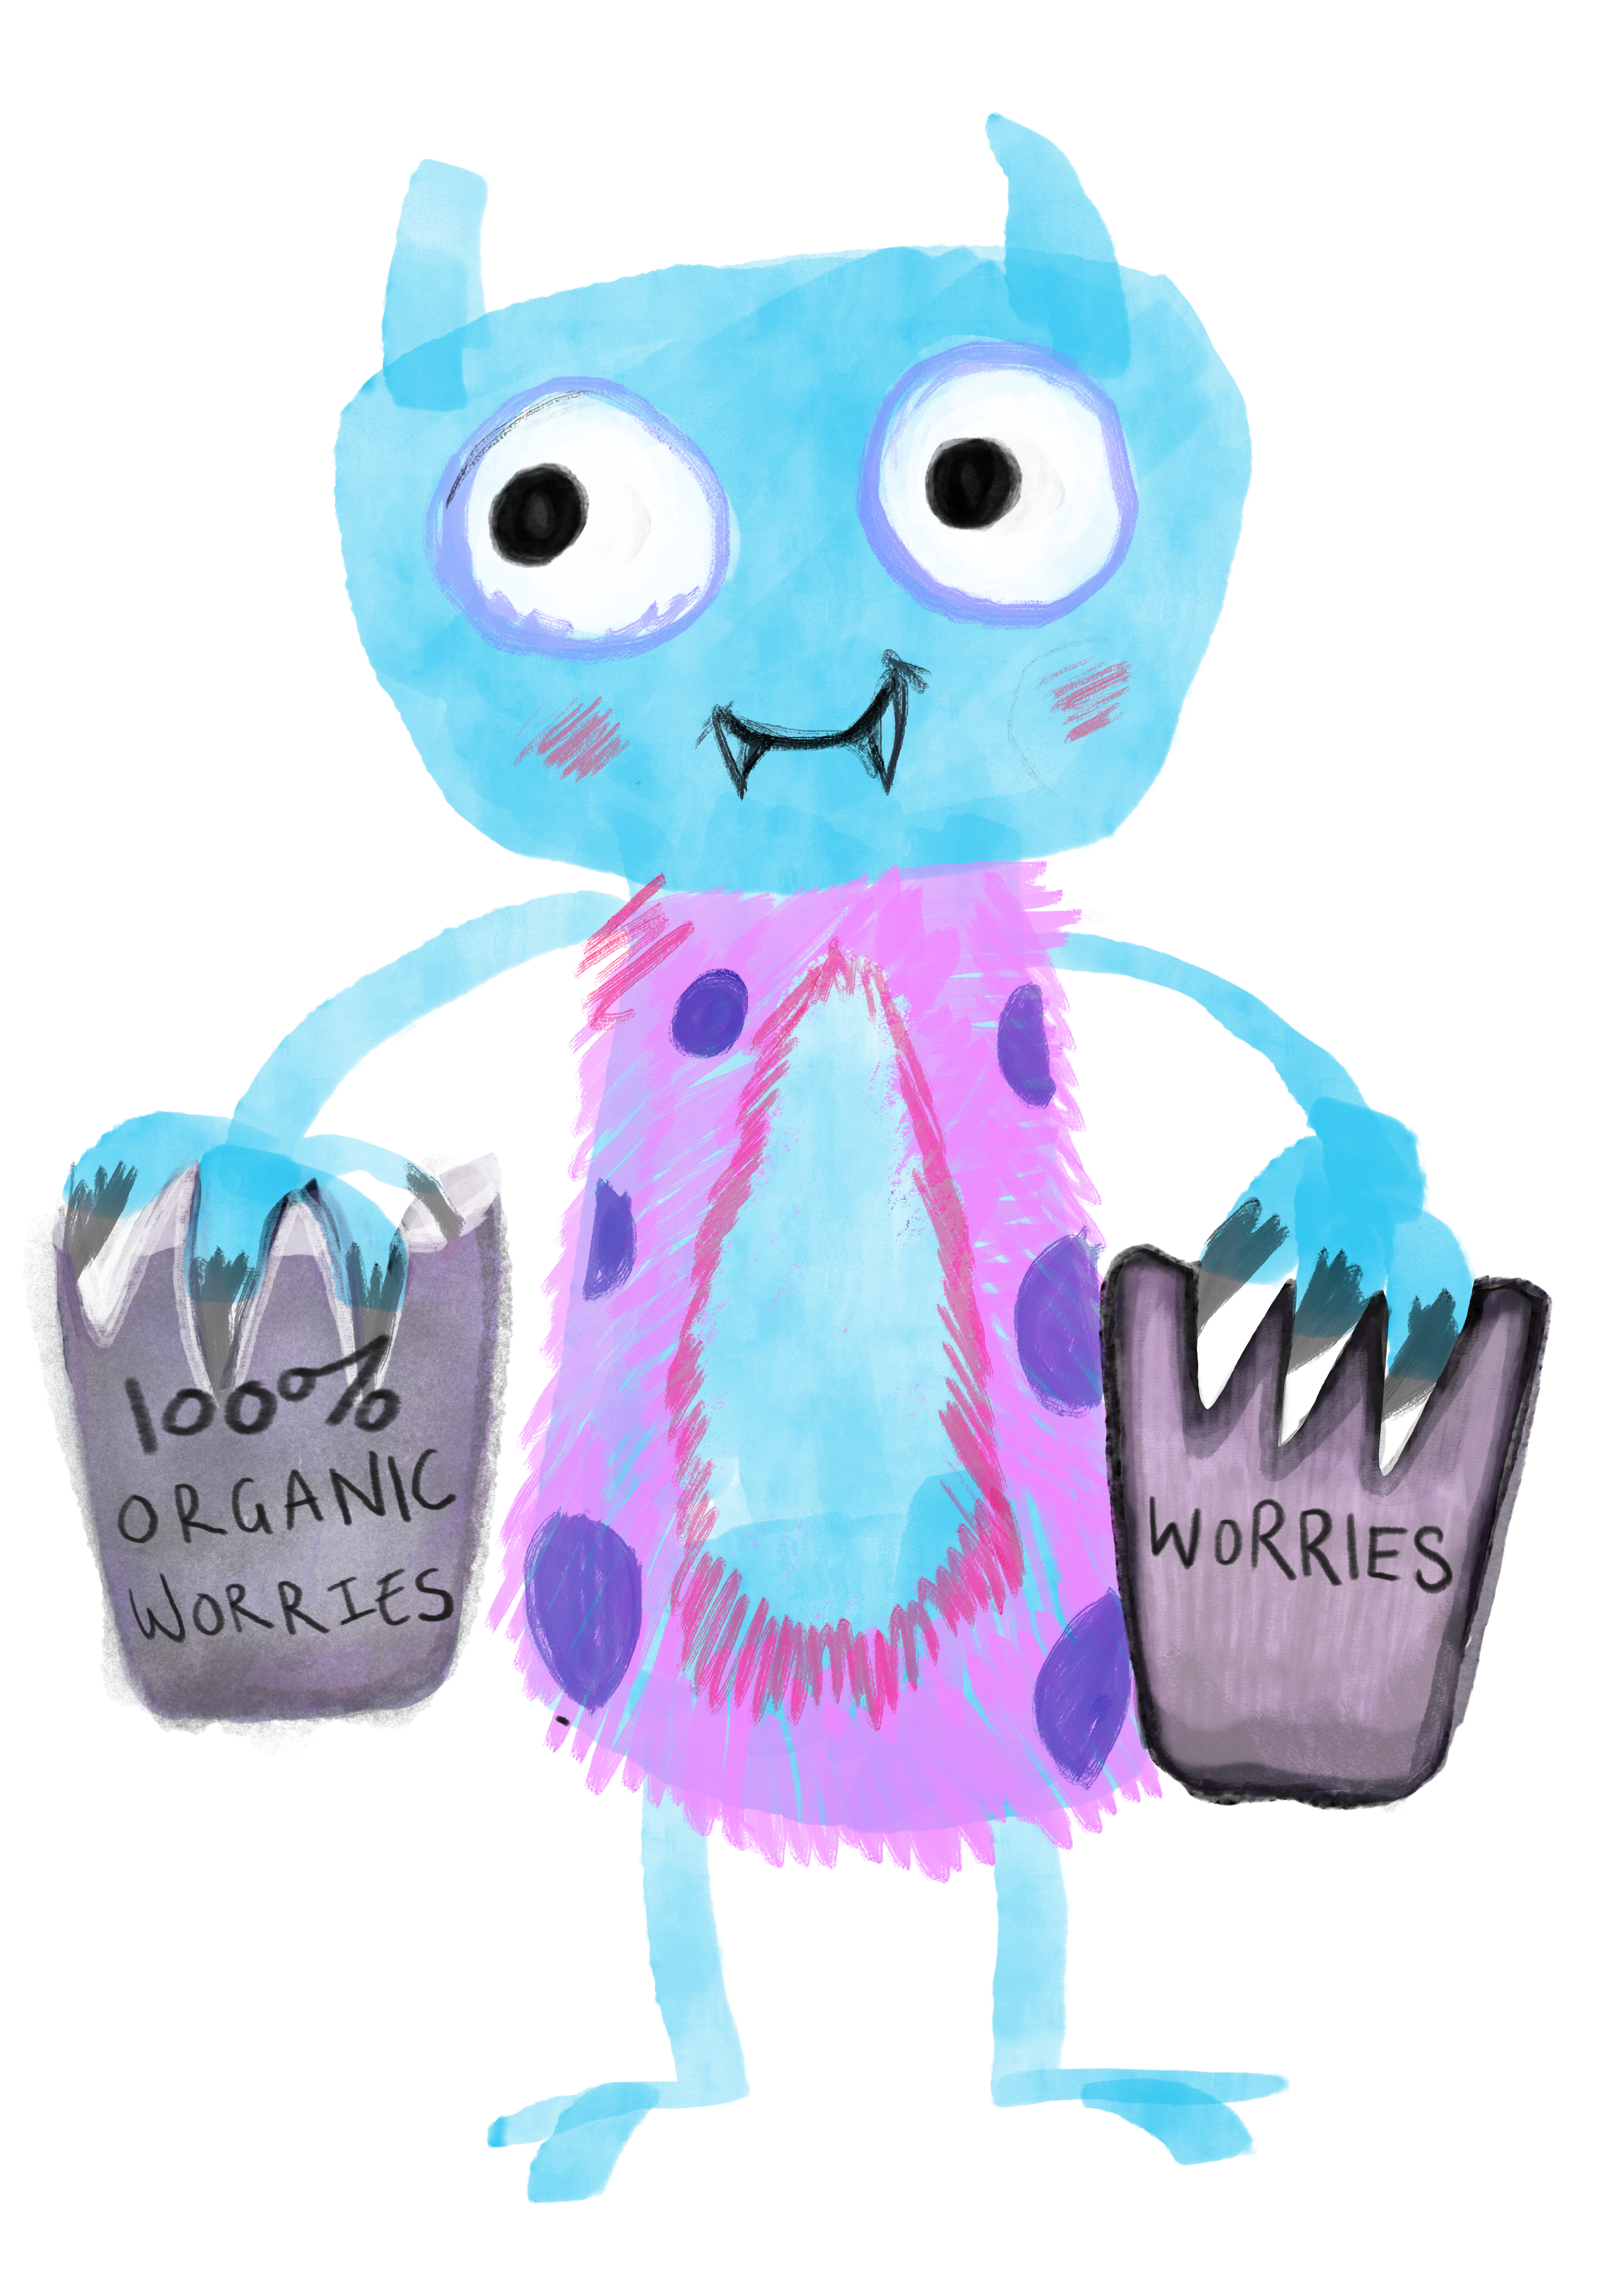 The worry monster holdin two bags of worries